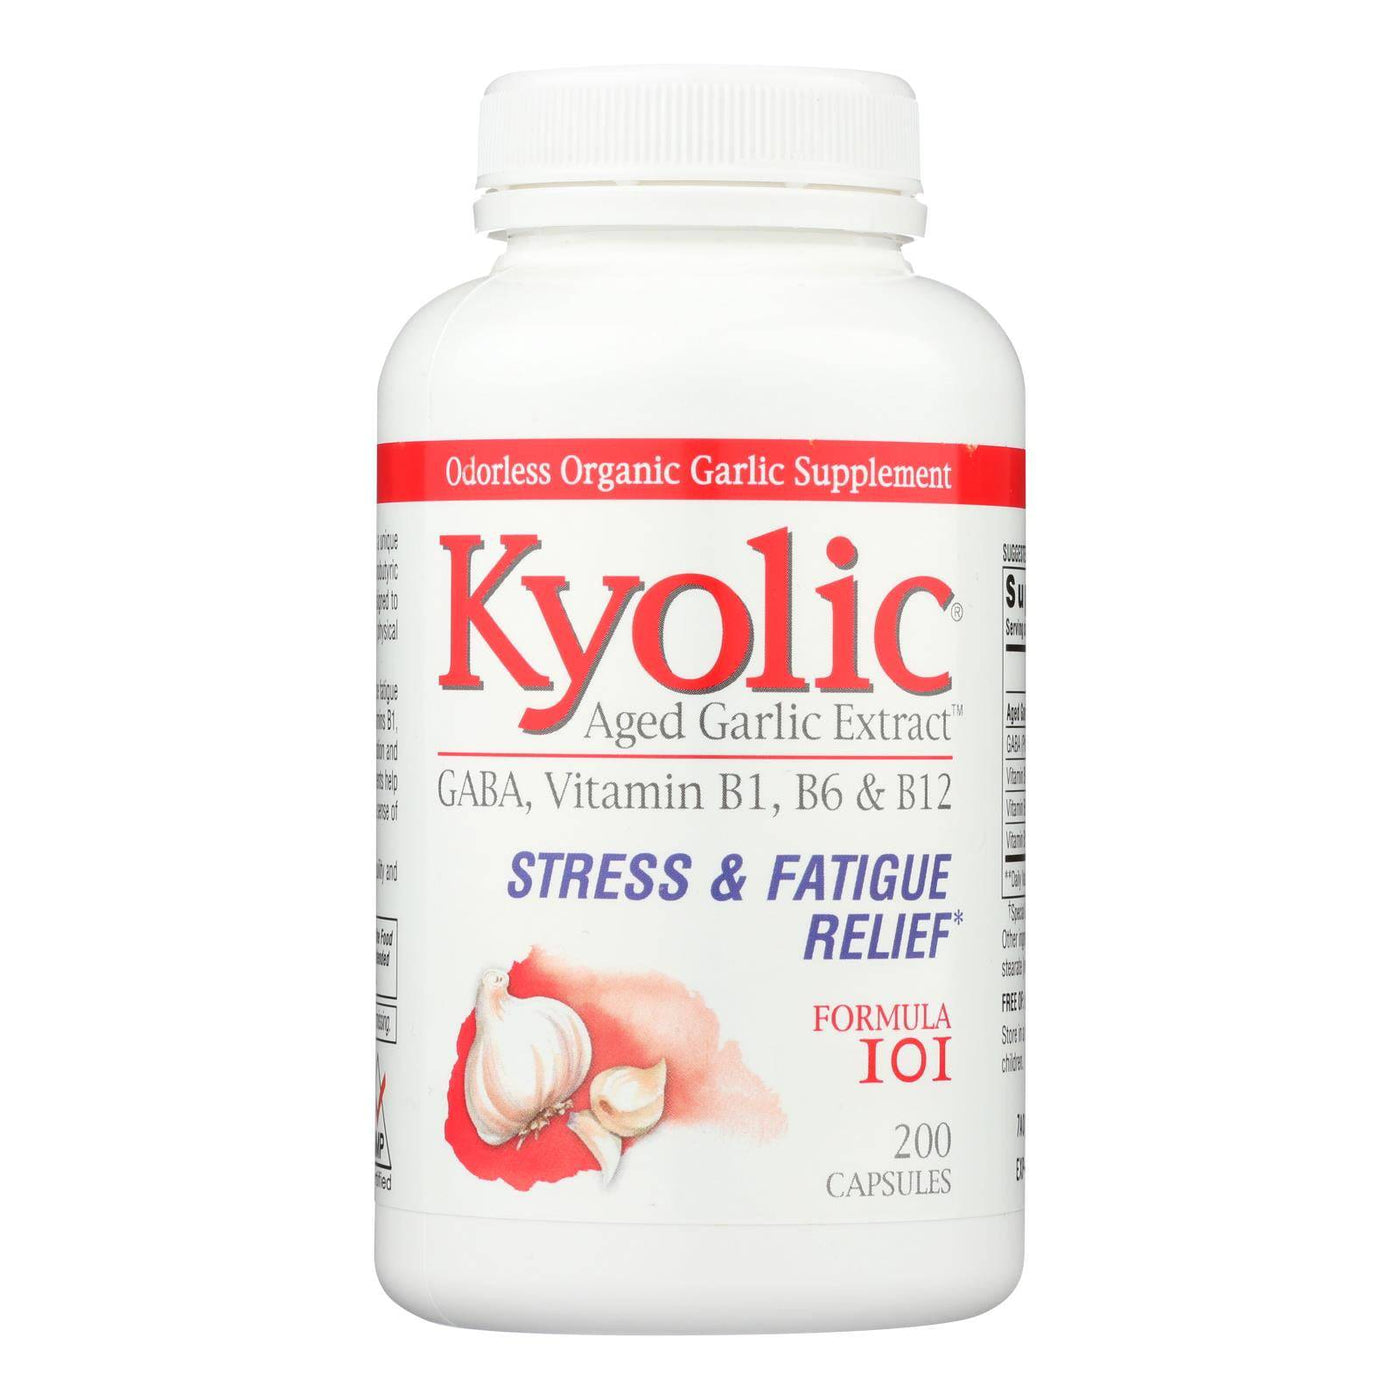 Kyolic - Aged Garlic Extract Stress And Fatigue Relief Formula 101 - 200 Capsules | OnlyNaturals.us